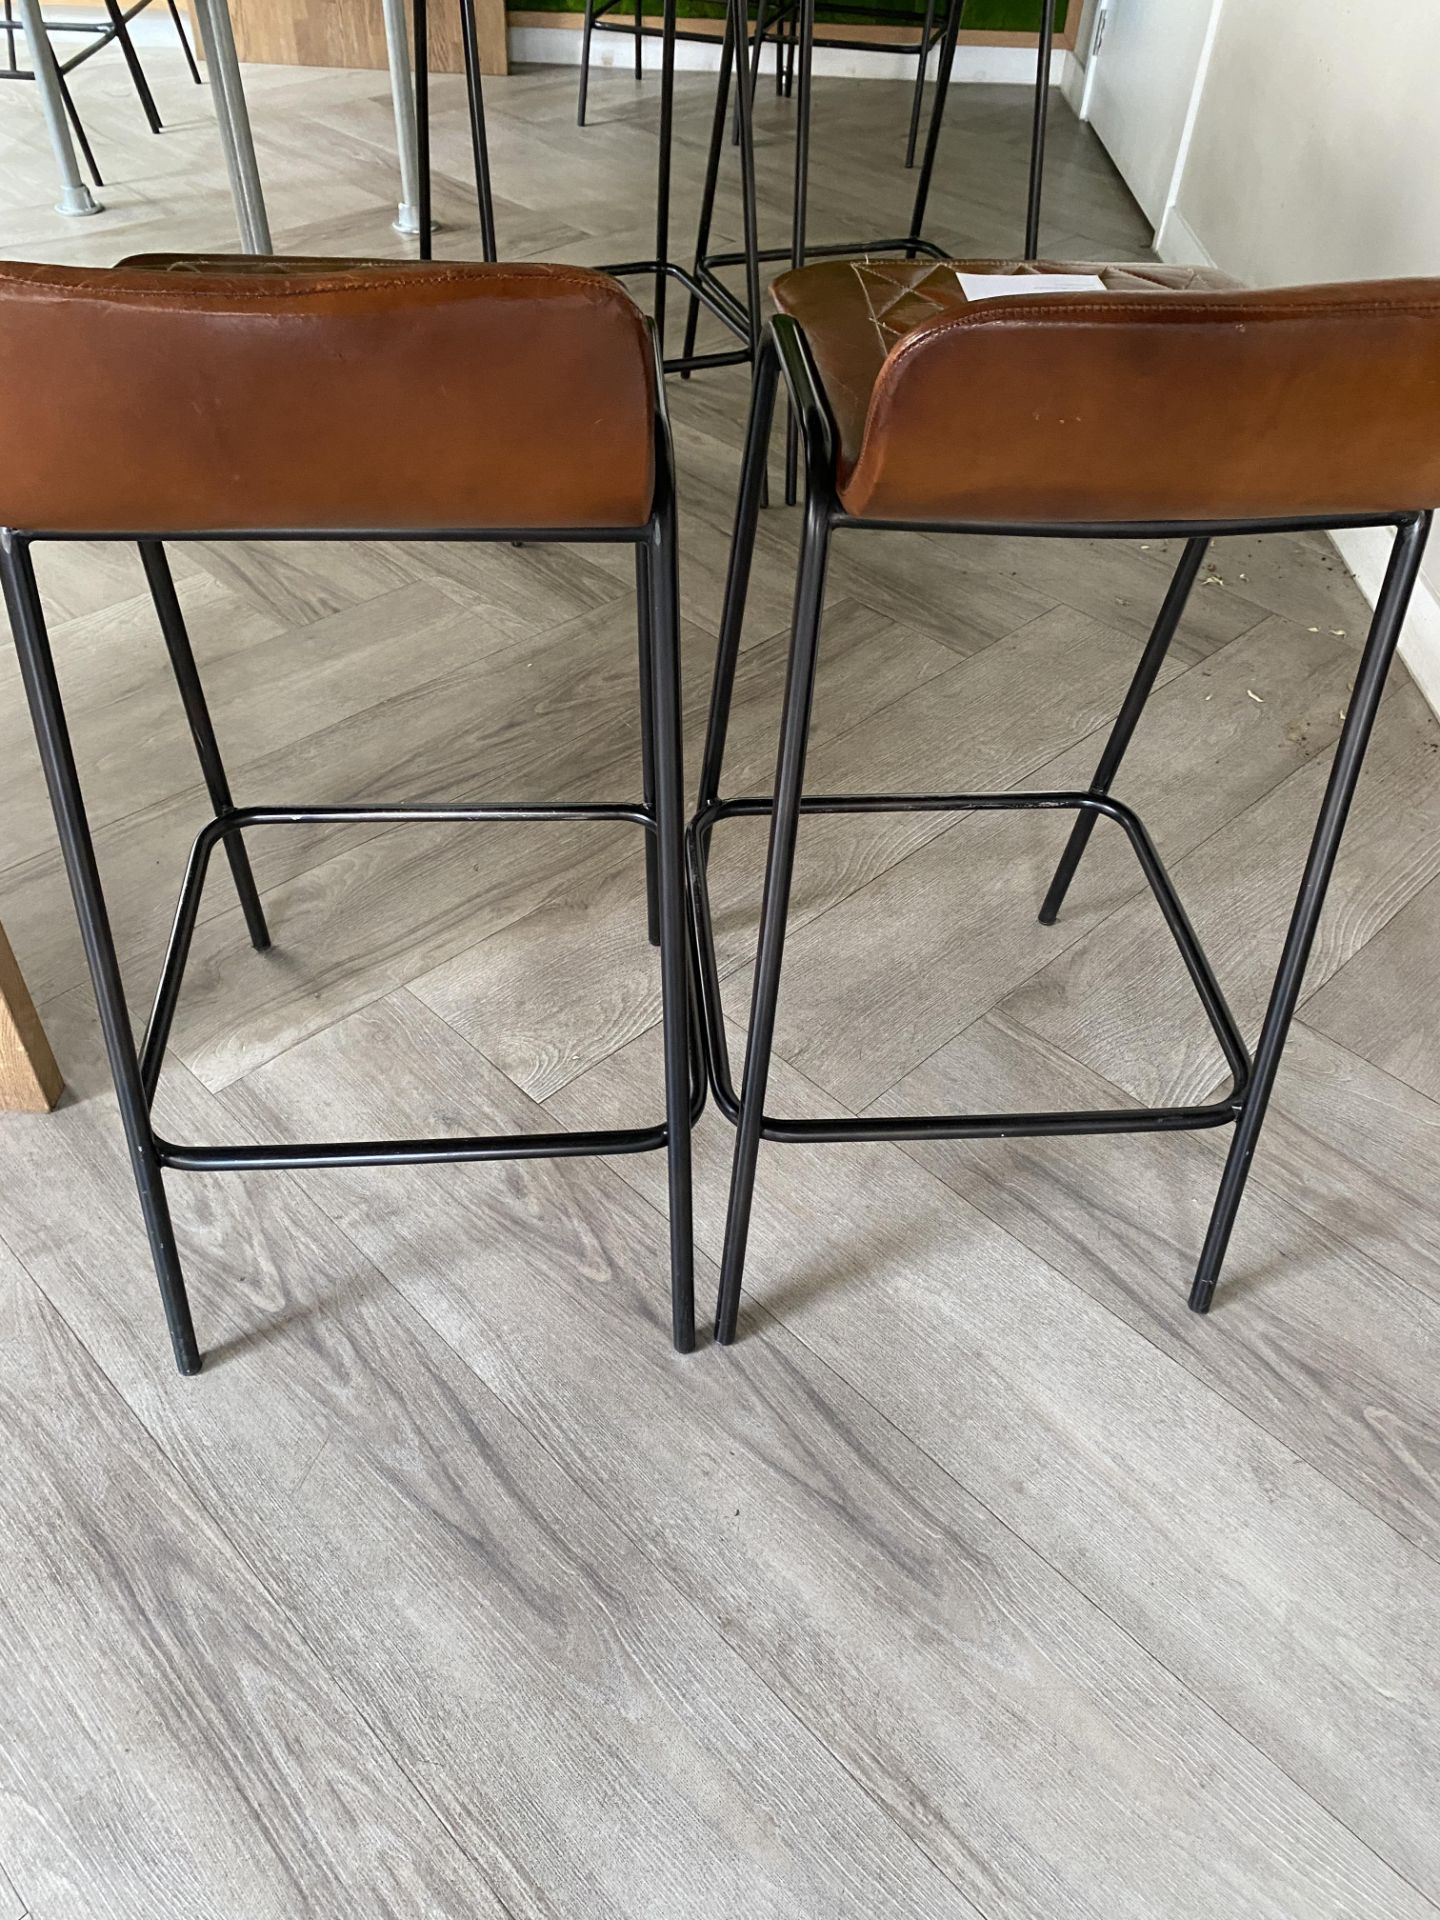 2x Leather Upholstered Bar Stools - New Cost £120 per stool - Image 3 of 4